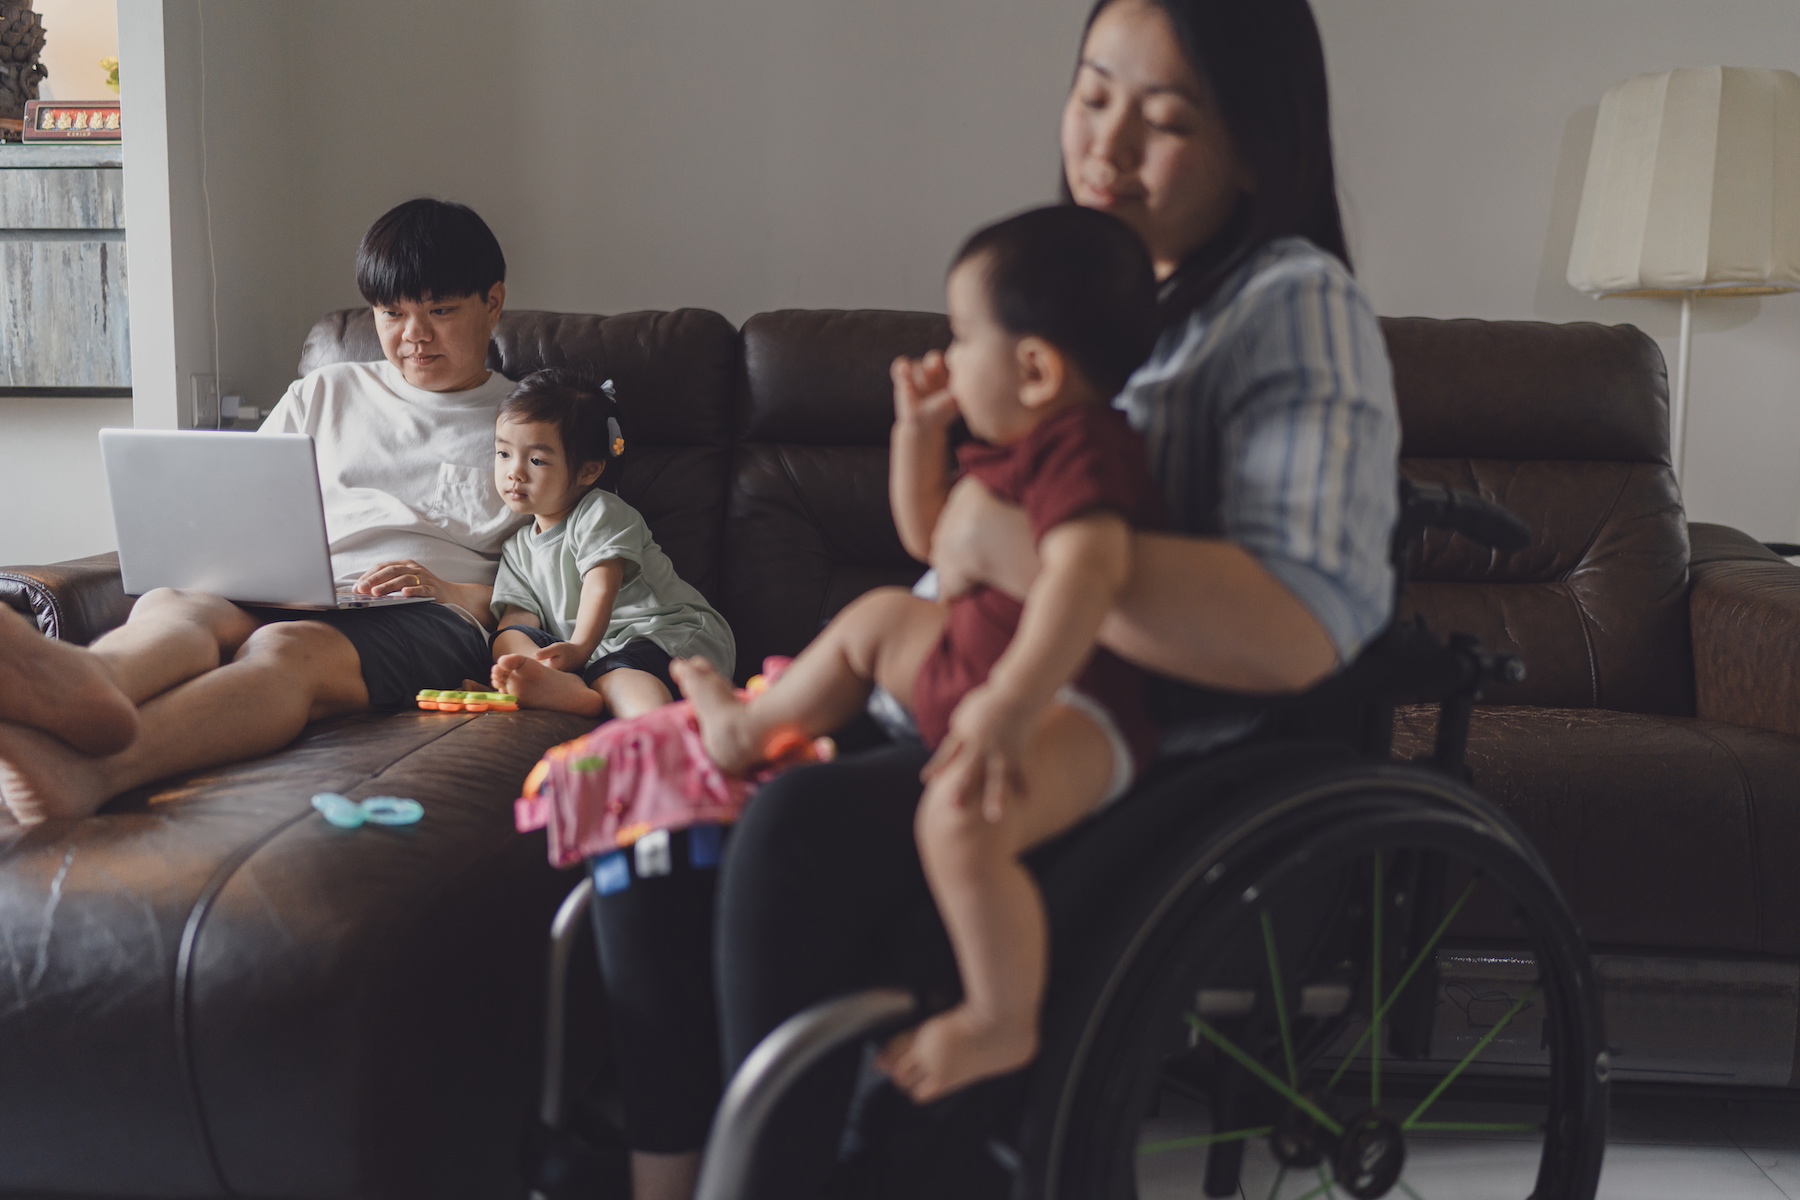 A family of four together in the living room, the mom is in seated in a wheelchair holding the baby